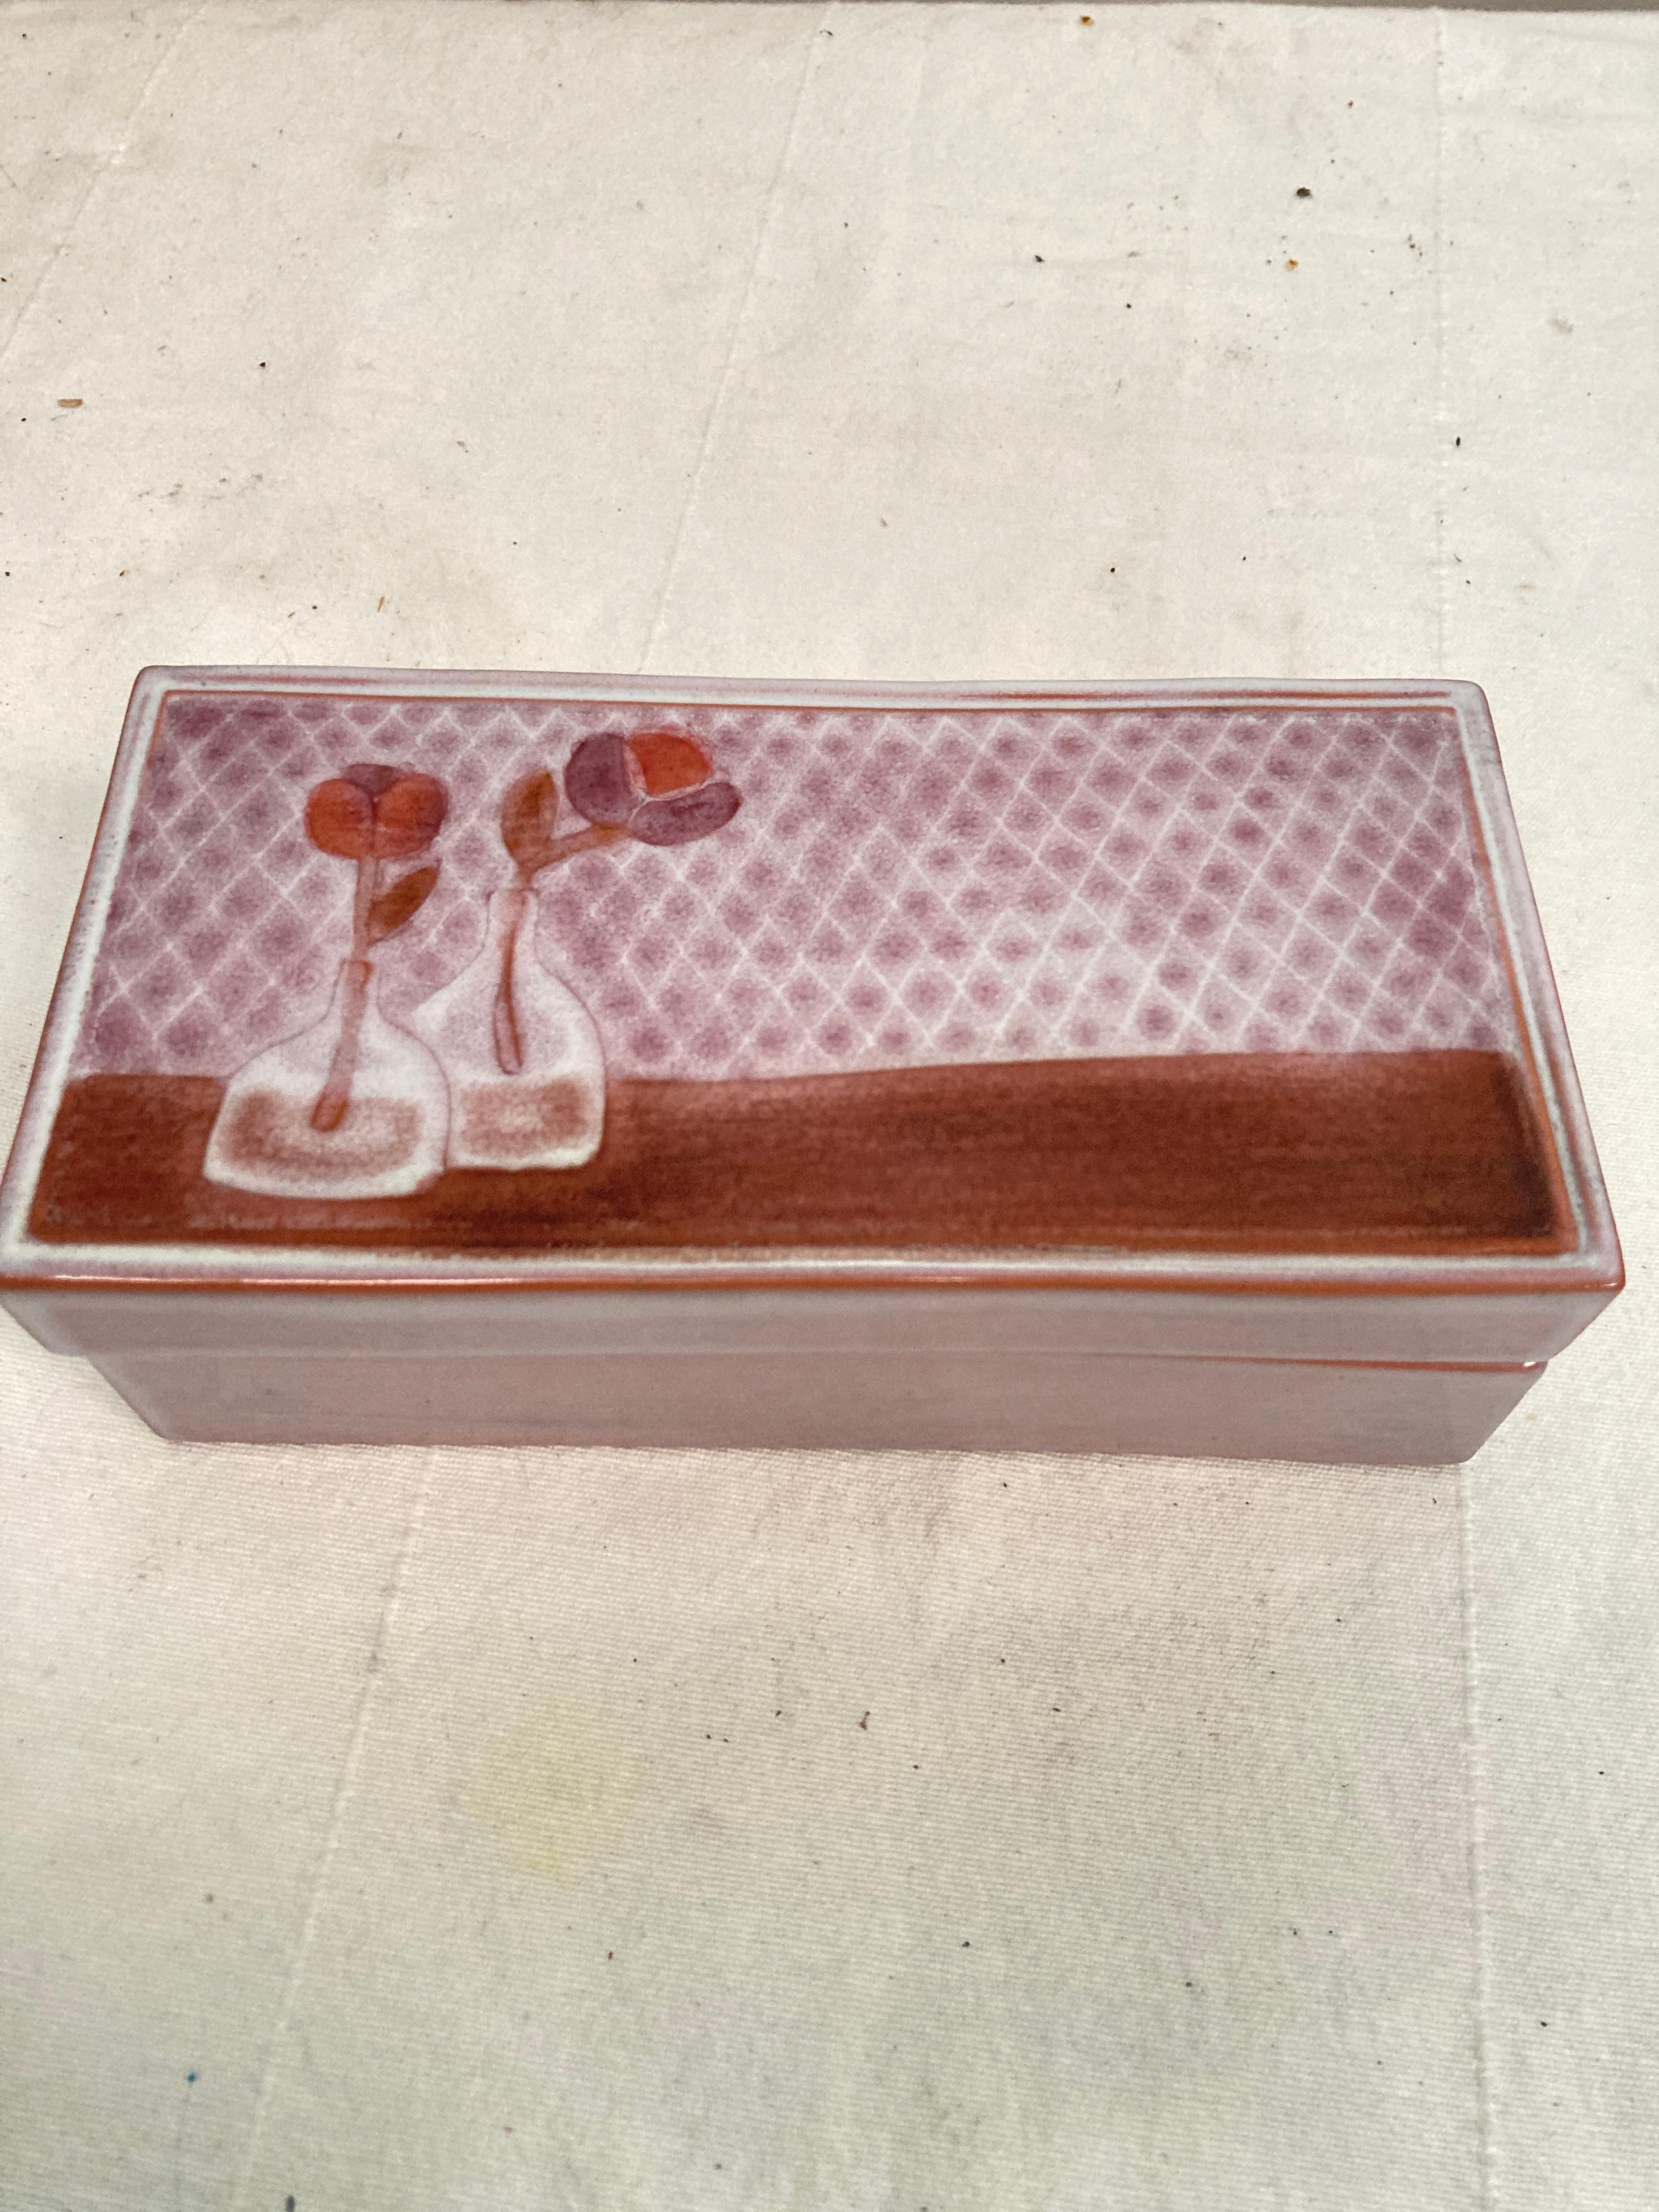 1970's Studio pottery ceramic box  by Robert Cloutier
France